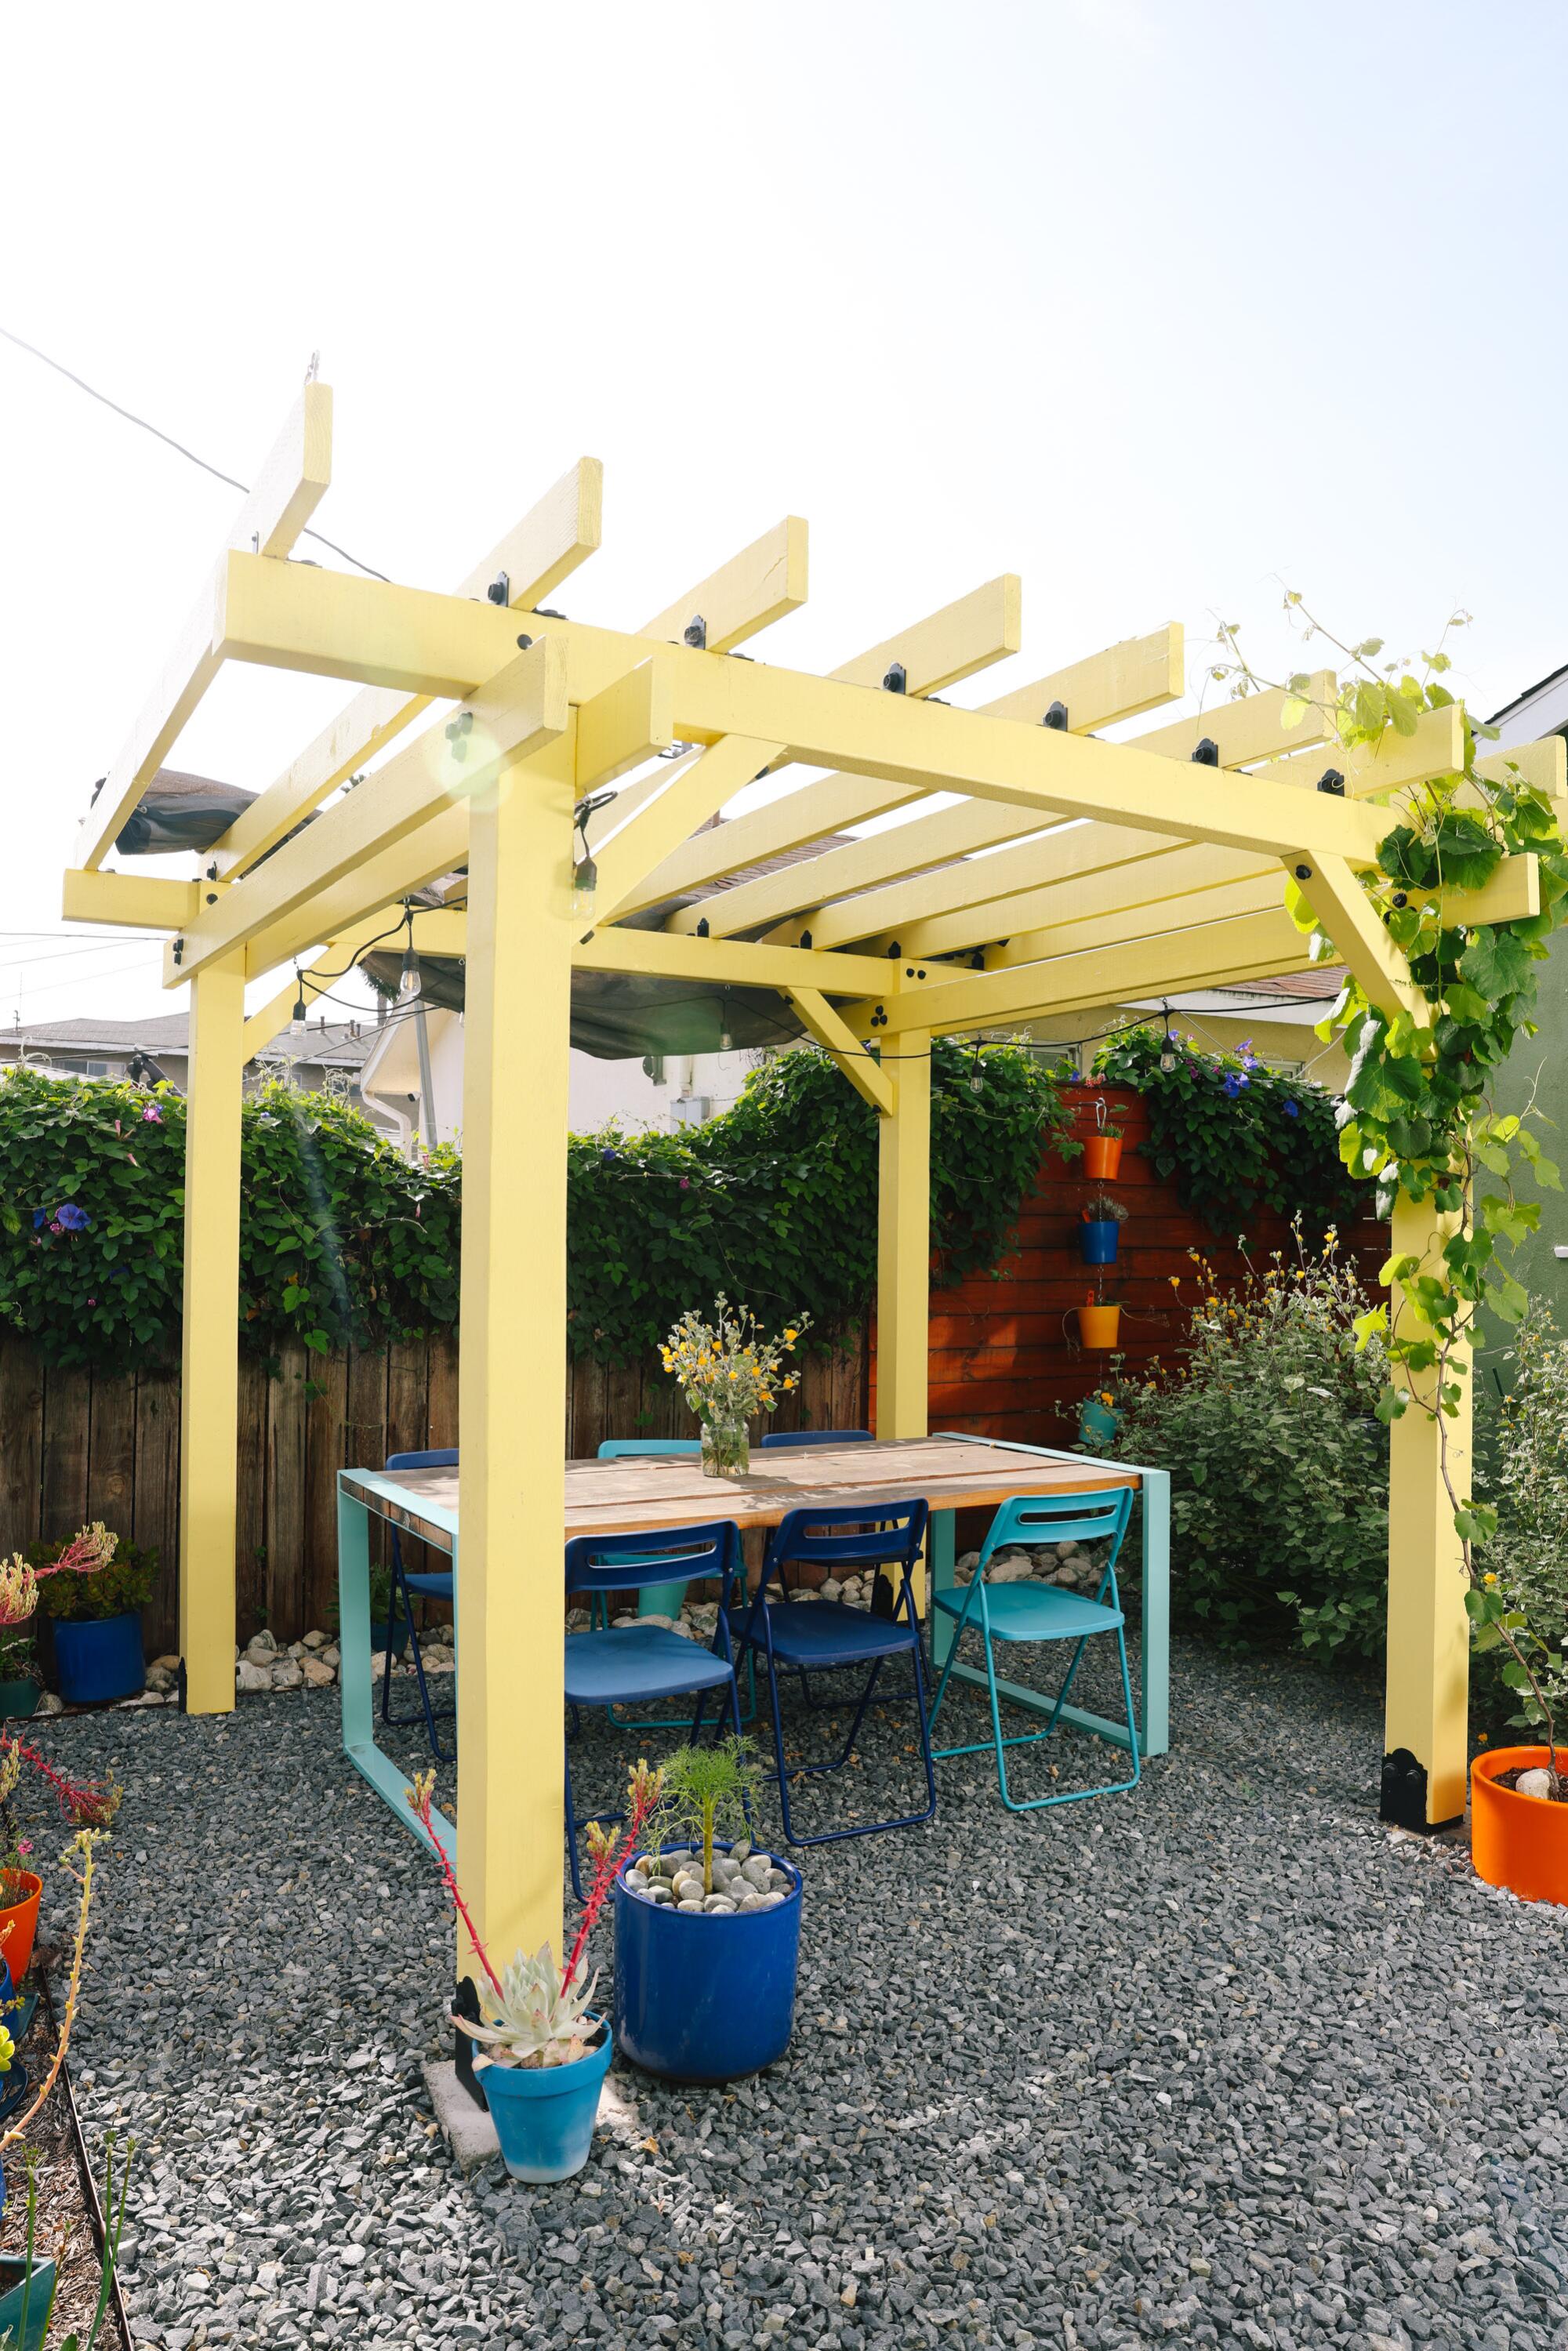 An outdoor dining area and pergola in the garden.